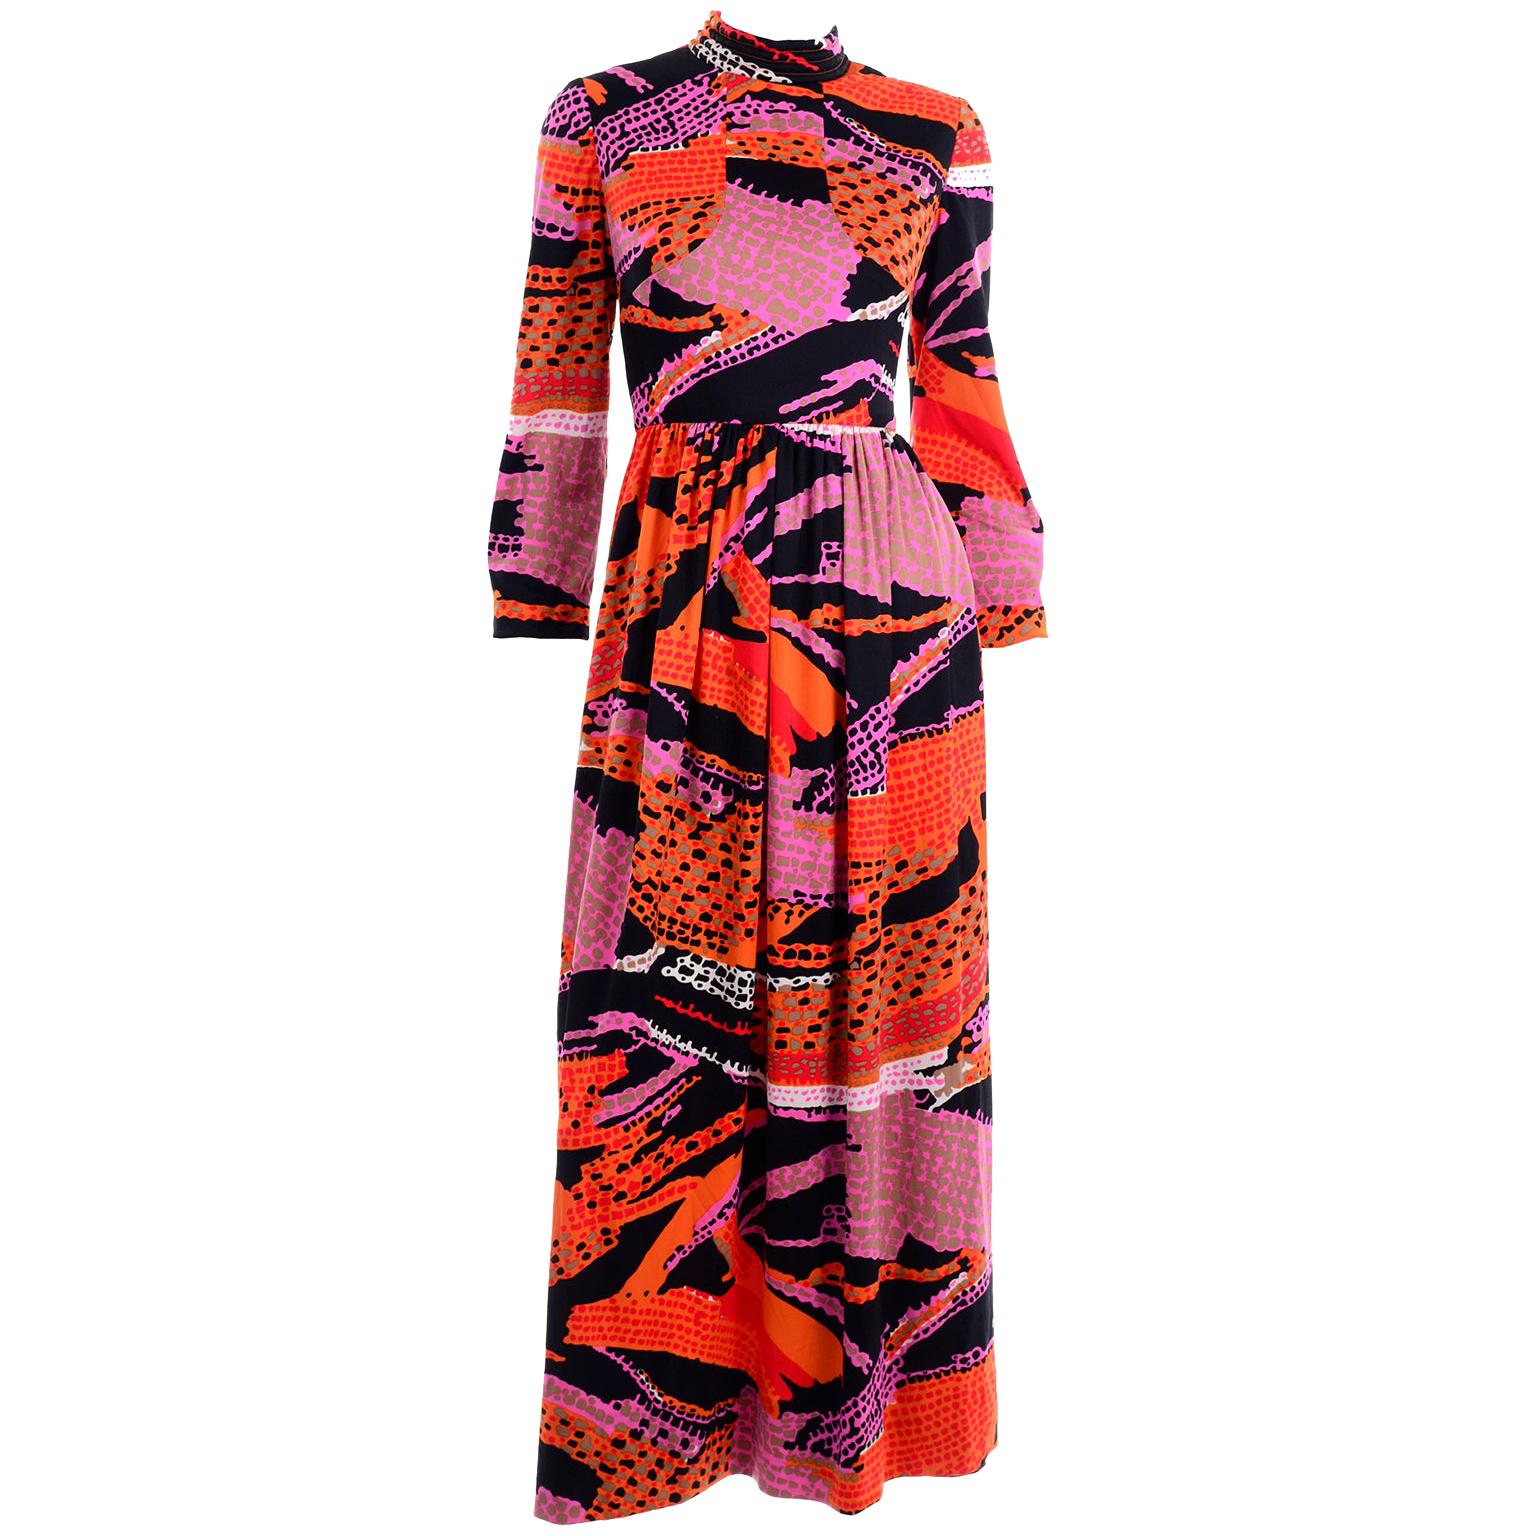 1970s Dynasty Vintage Maxi Dress in Mod Red Orange Pink & Black Abstract Print 